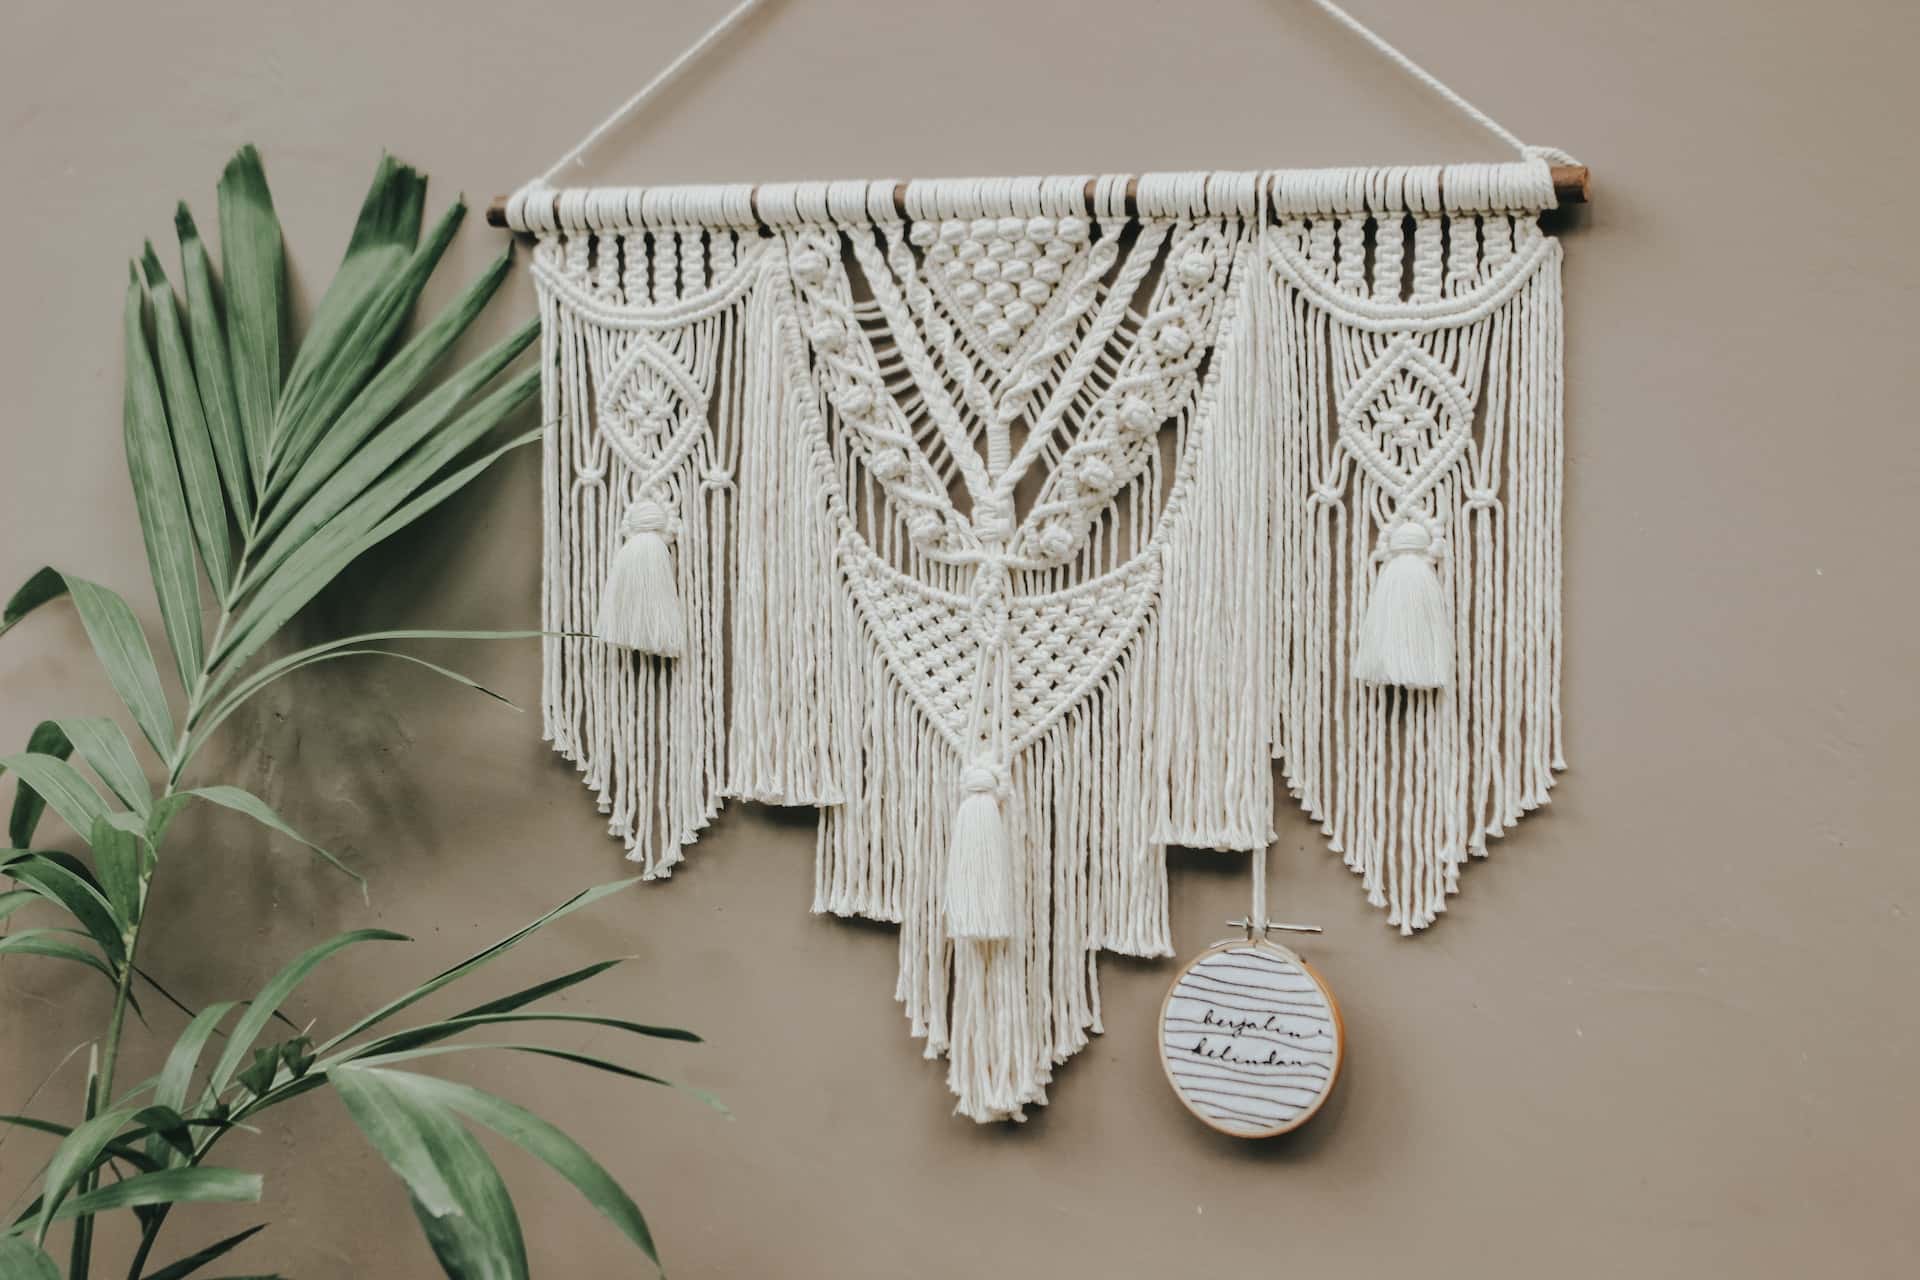 12 In-Vogue Wall Hanging Ideas for All the Feels